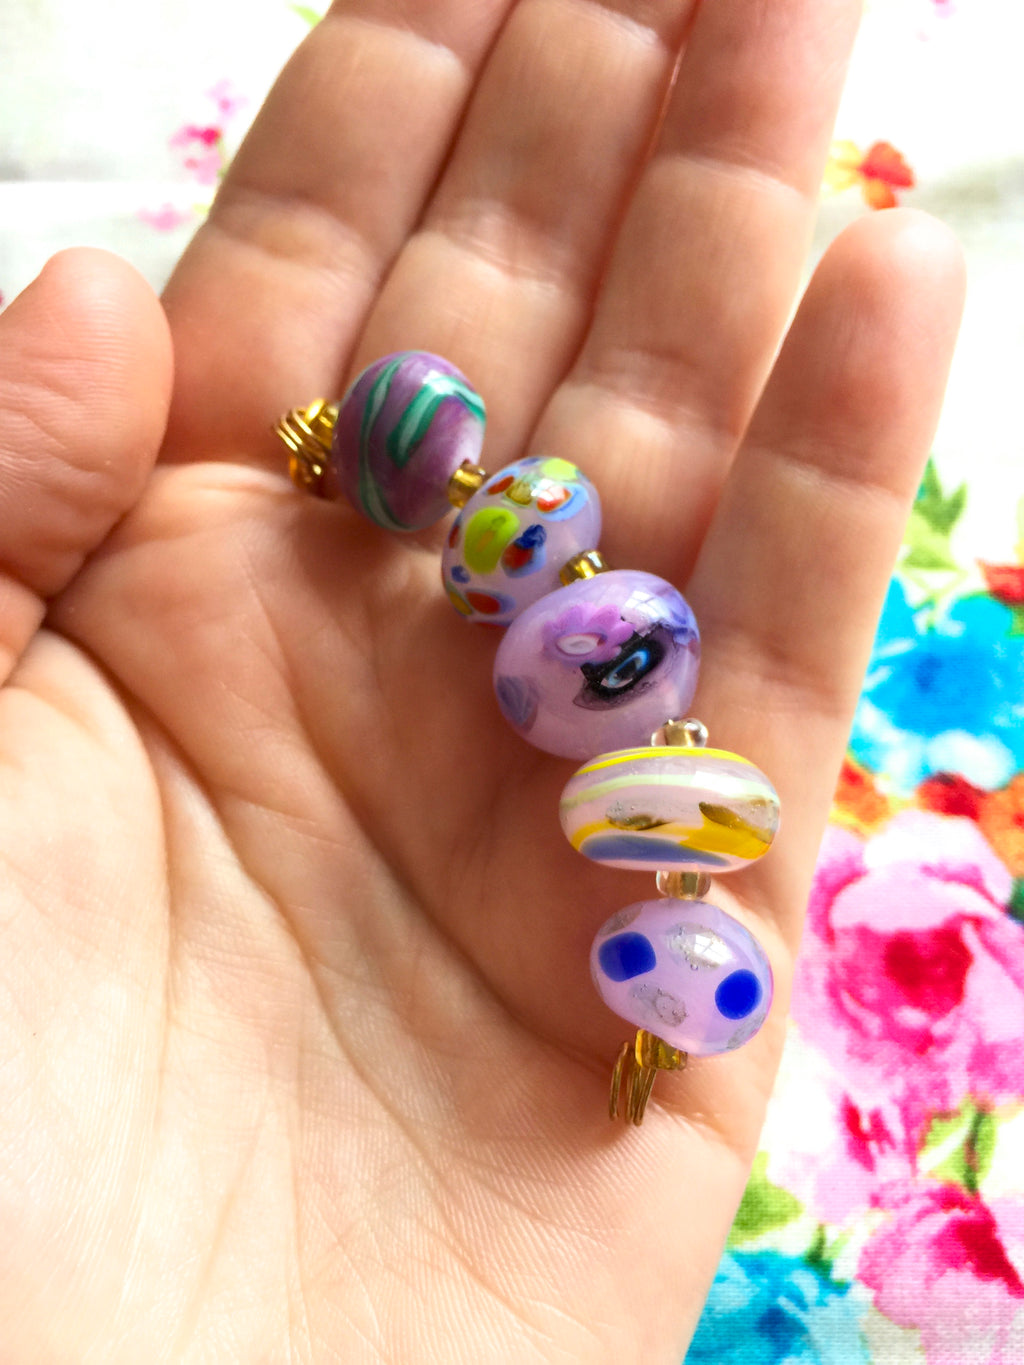 Set of 5 Handcrafted Lampwork Glass Beads in shades of Pink, Blues, Violet with spots and stripes Active